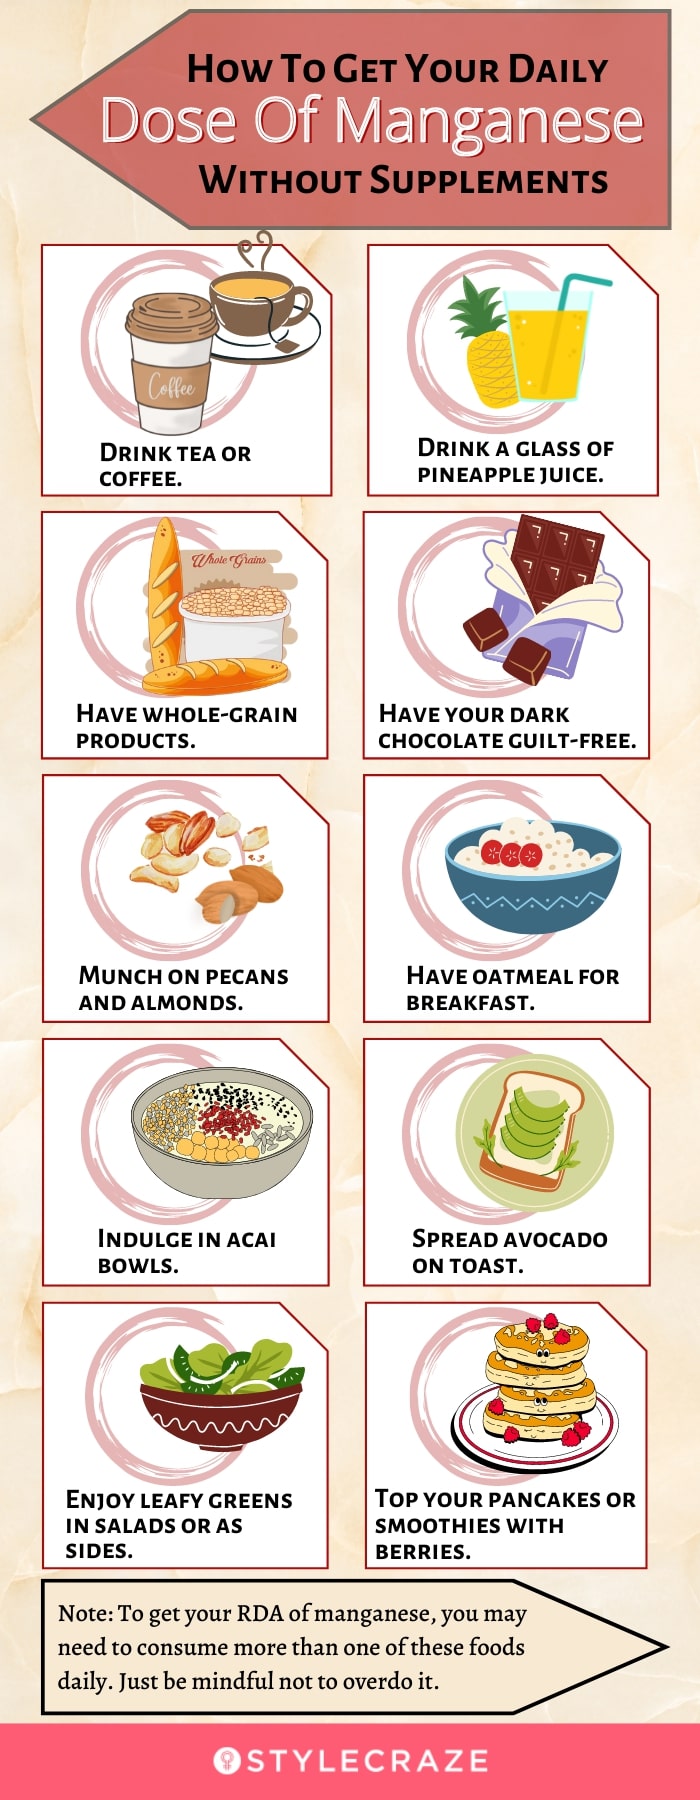 how to get your daily dose of manganese without supplements (infographic)